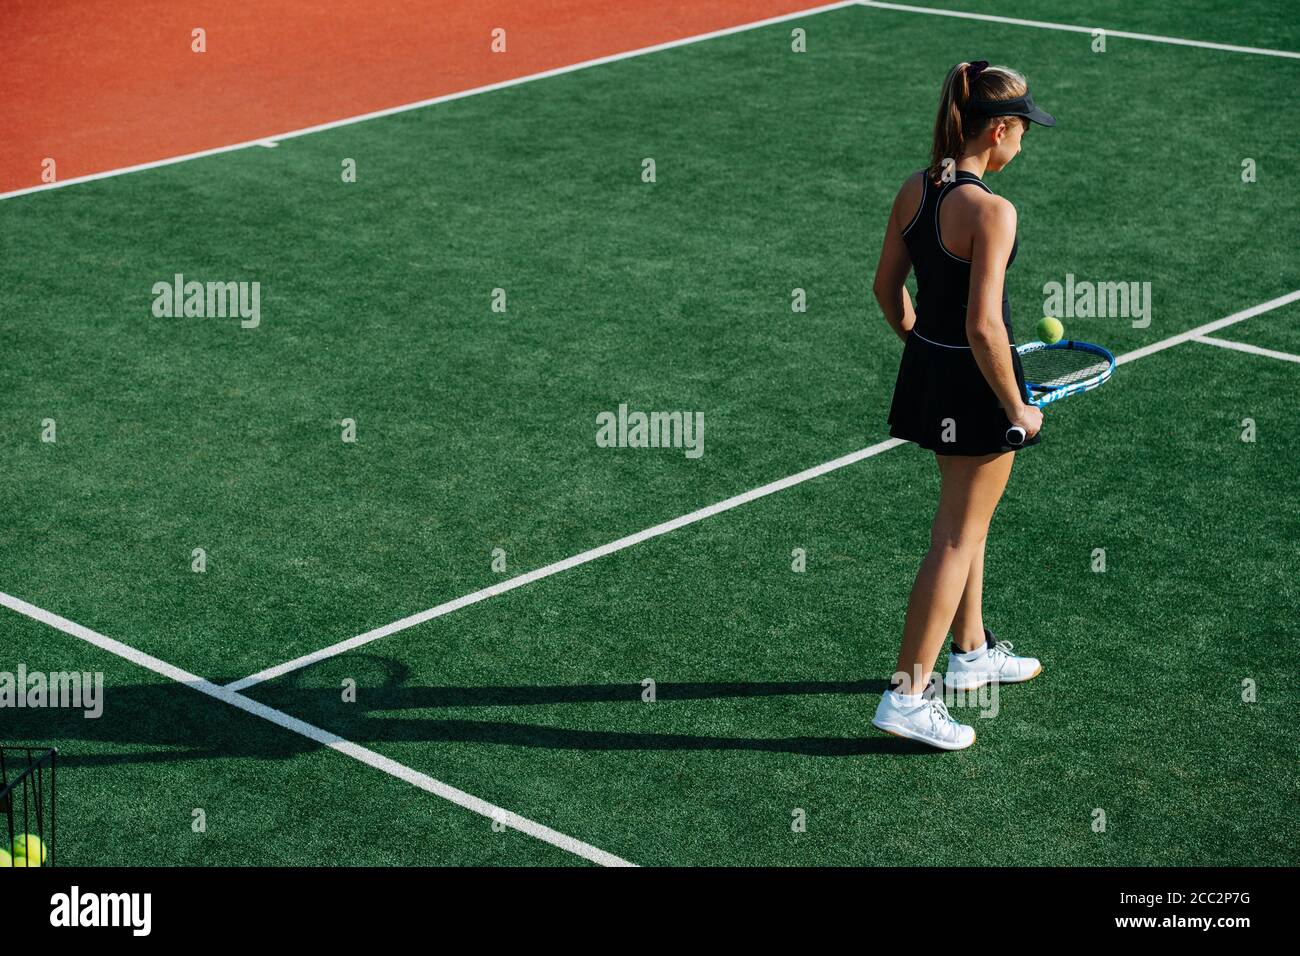 Slim teenage girl walking on a new tennis court, bouncing ball off her racket Stock Photo